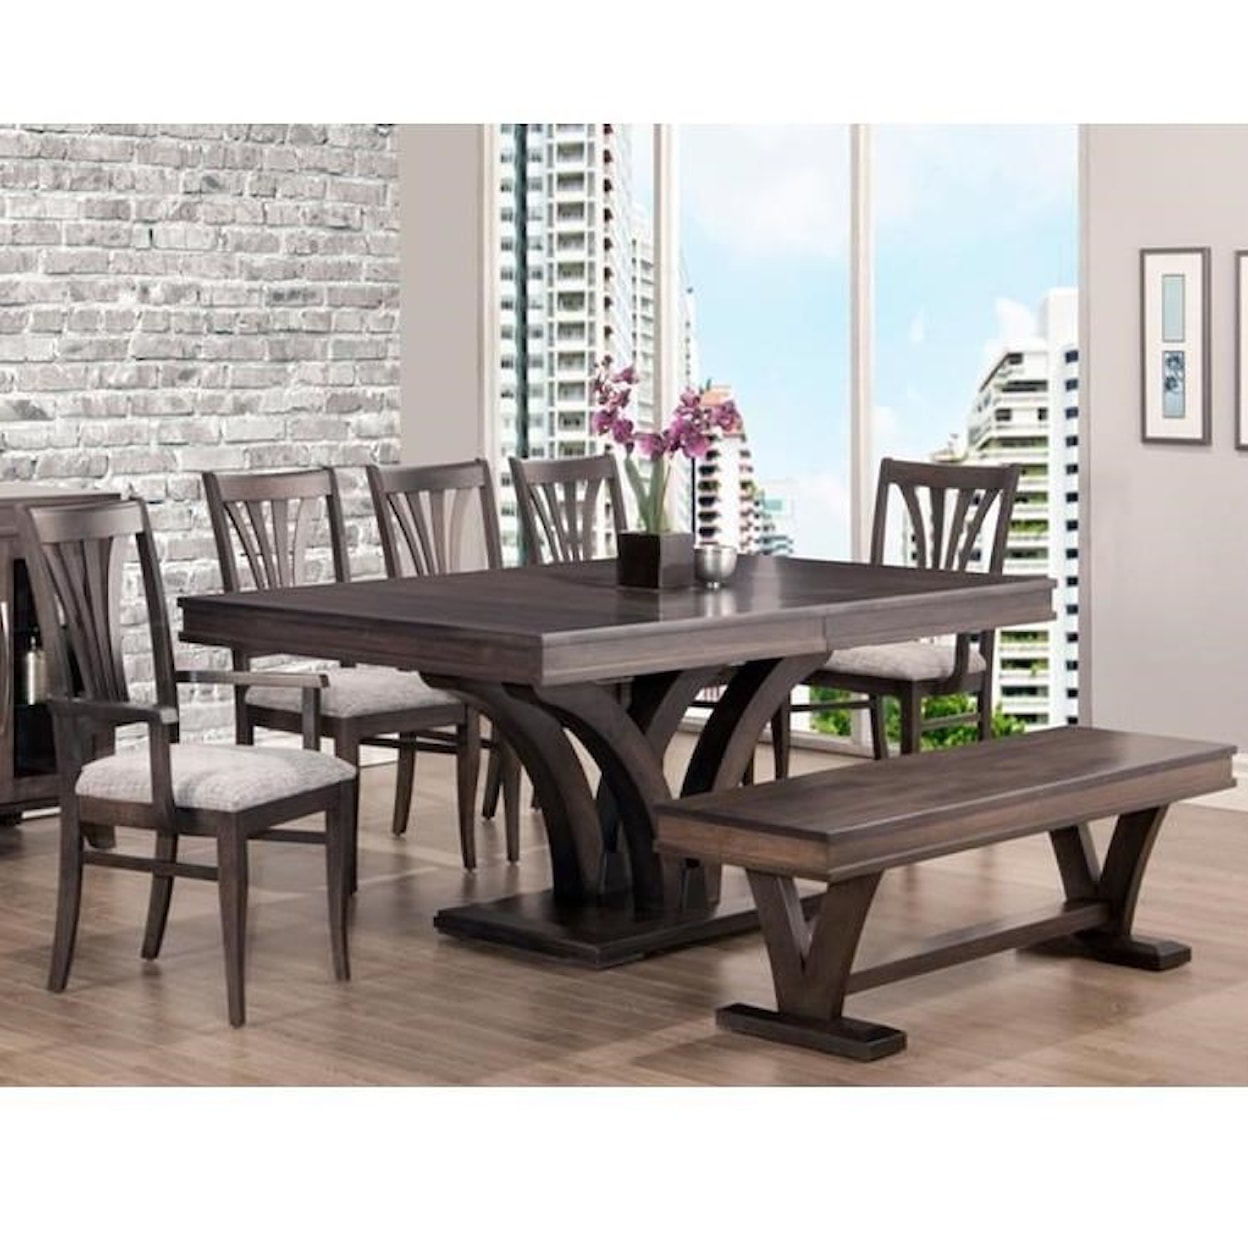 Handstone Verona Customizable Table and Chair Set with Bench